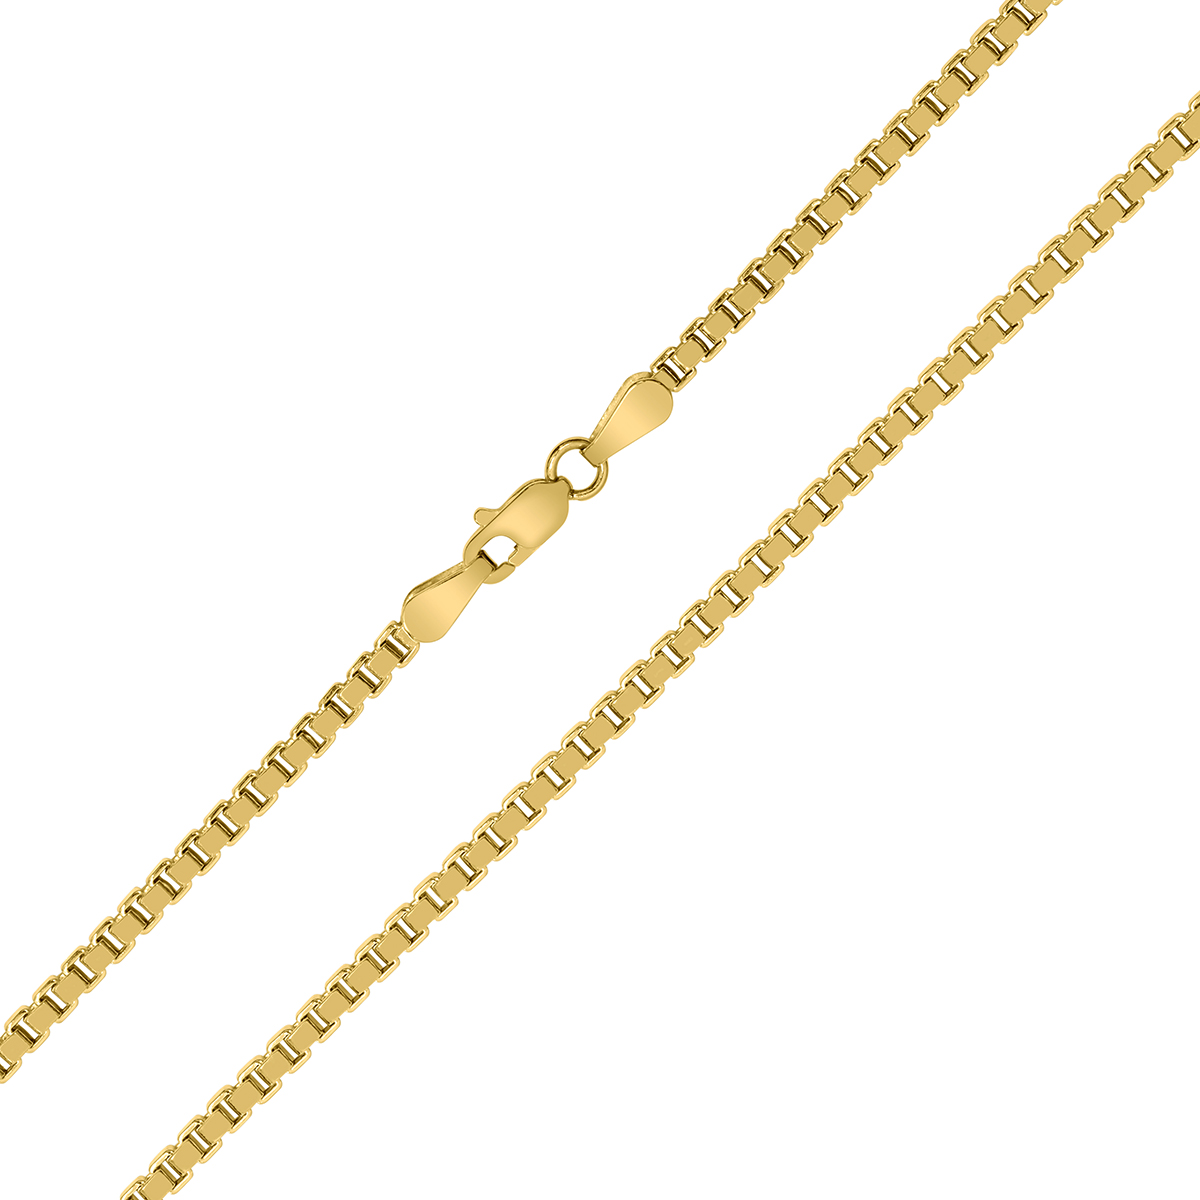 14K Yellow Gold 2.5mm Shiny Square Hollow Classic Box Chain with Lobster Clasp - 22 Inch